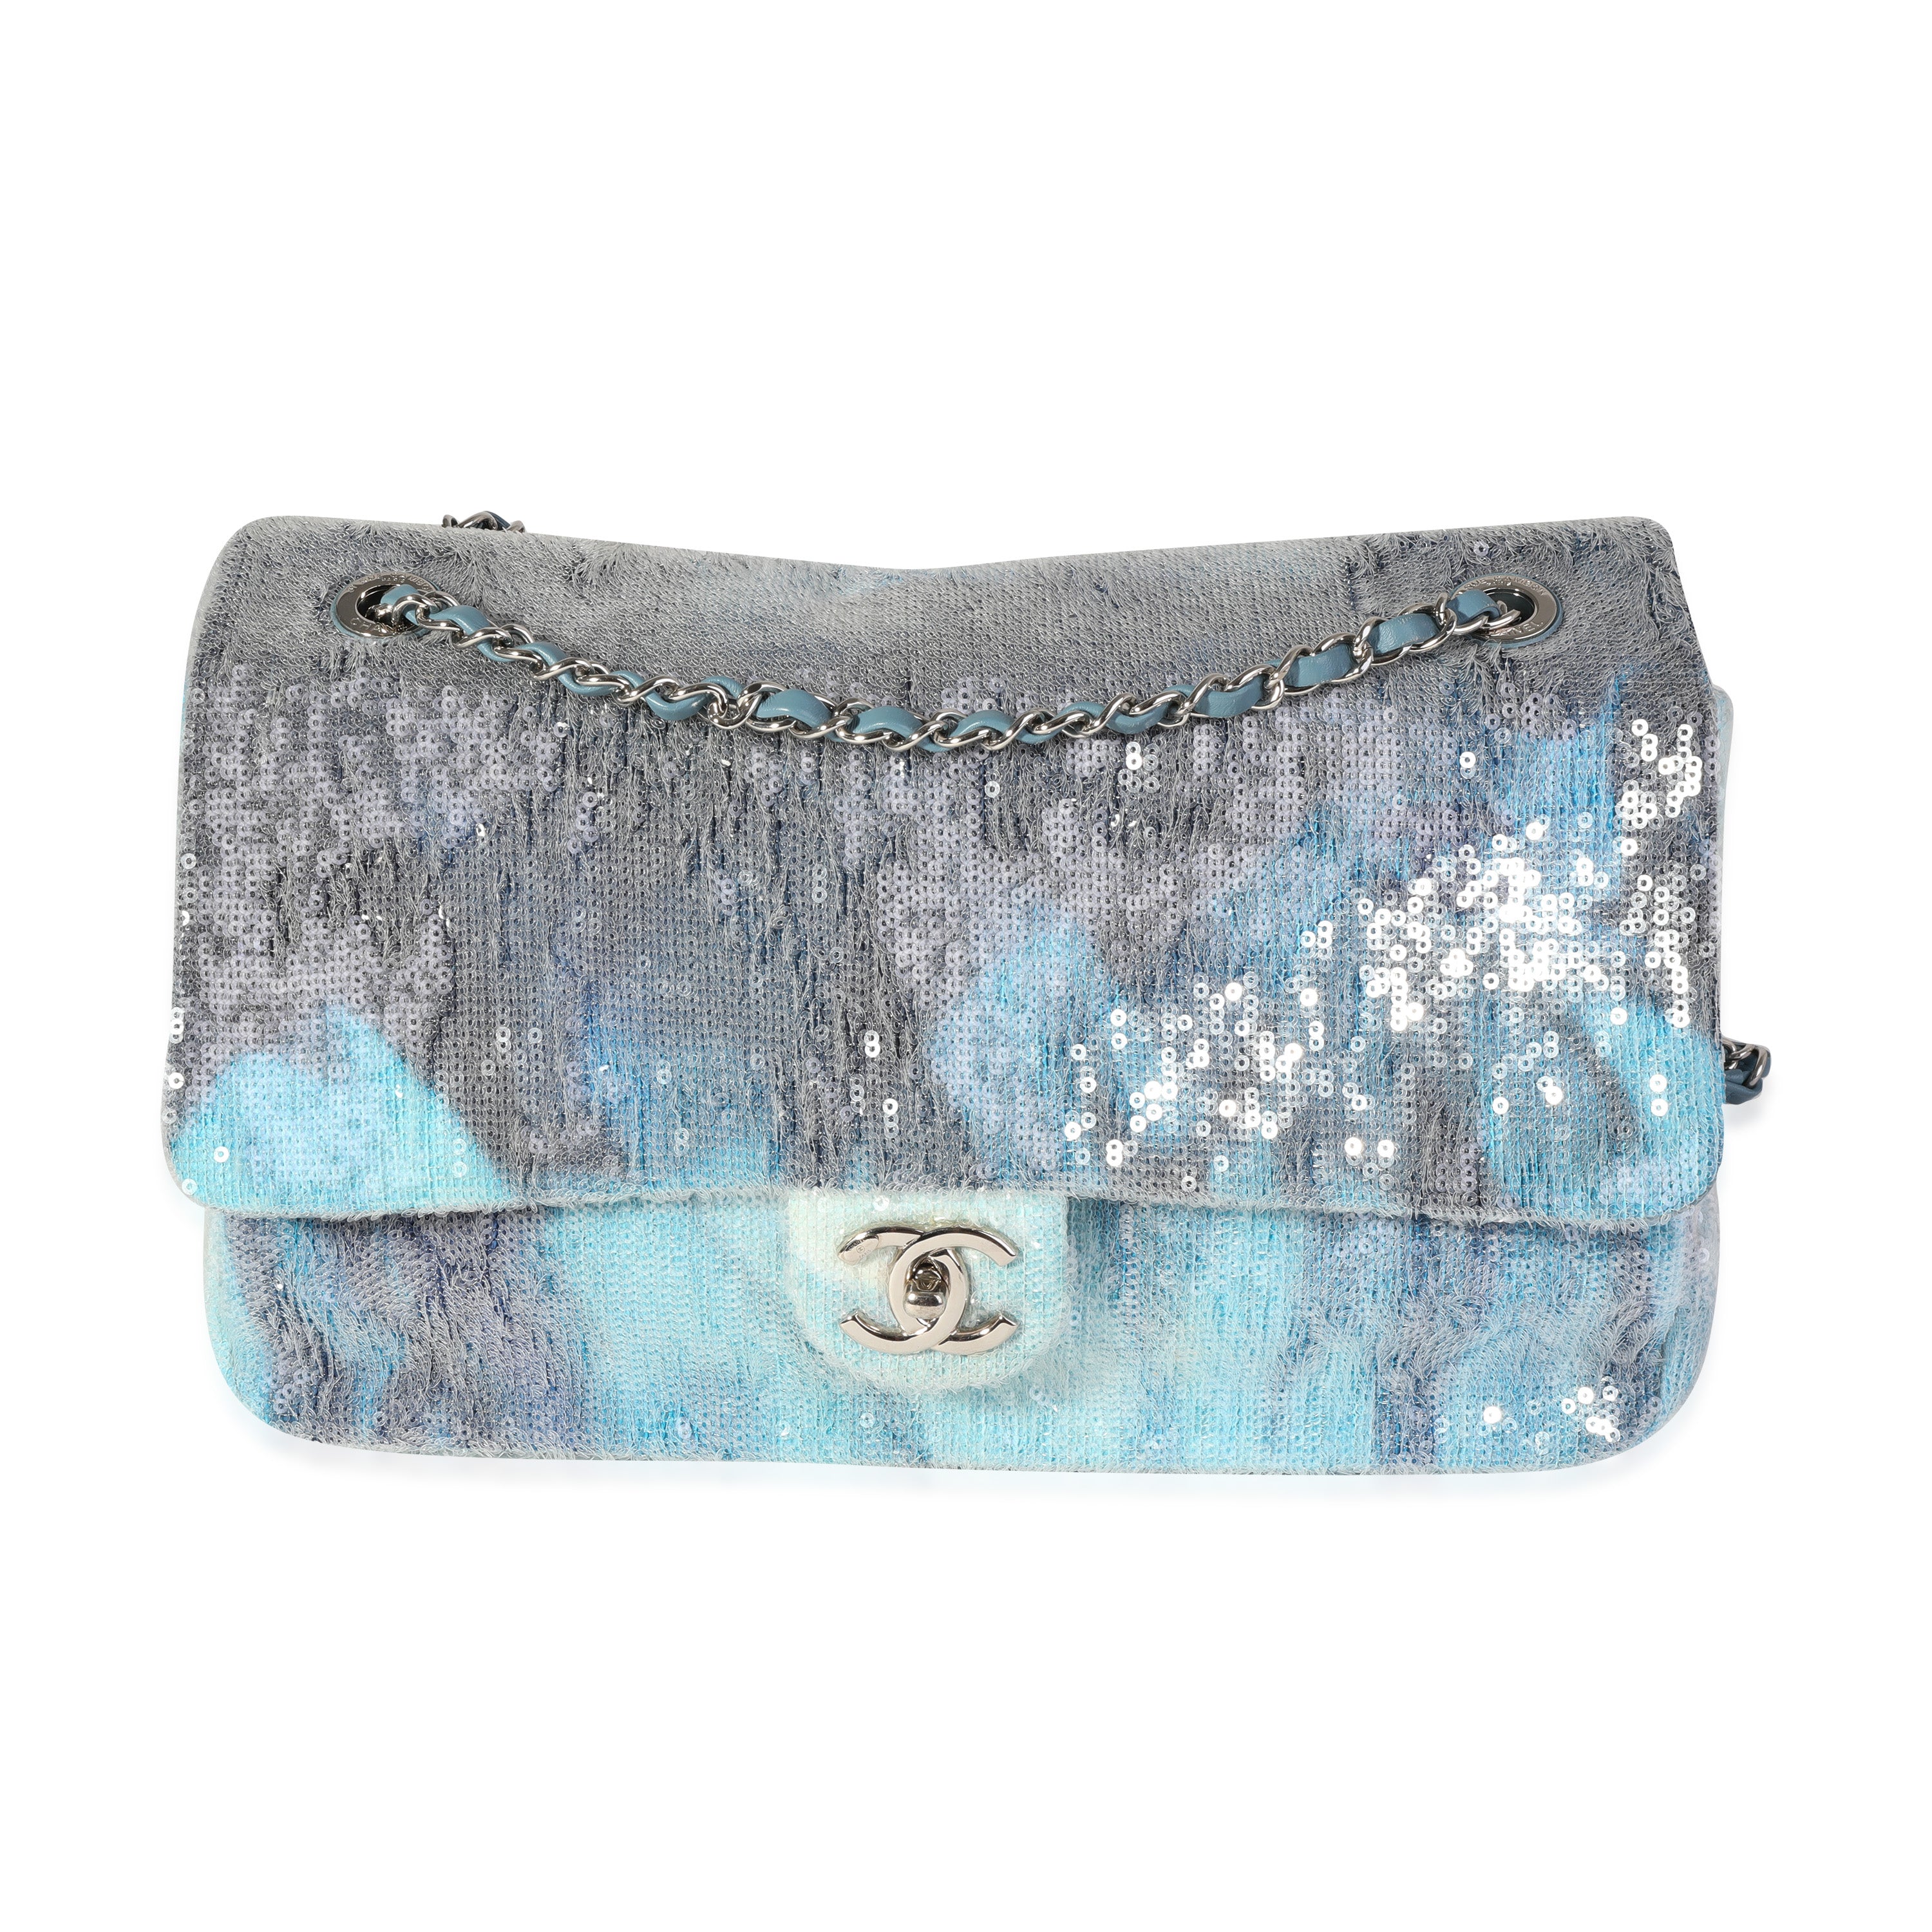 CHANEL Sequin Large Waterfall Flap Light Blue 638843